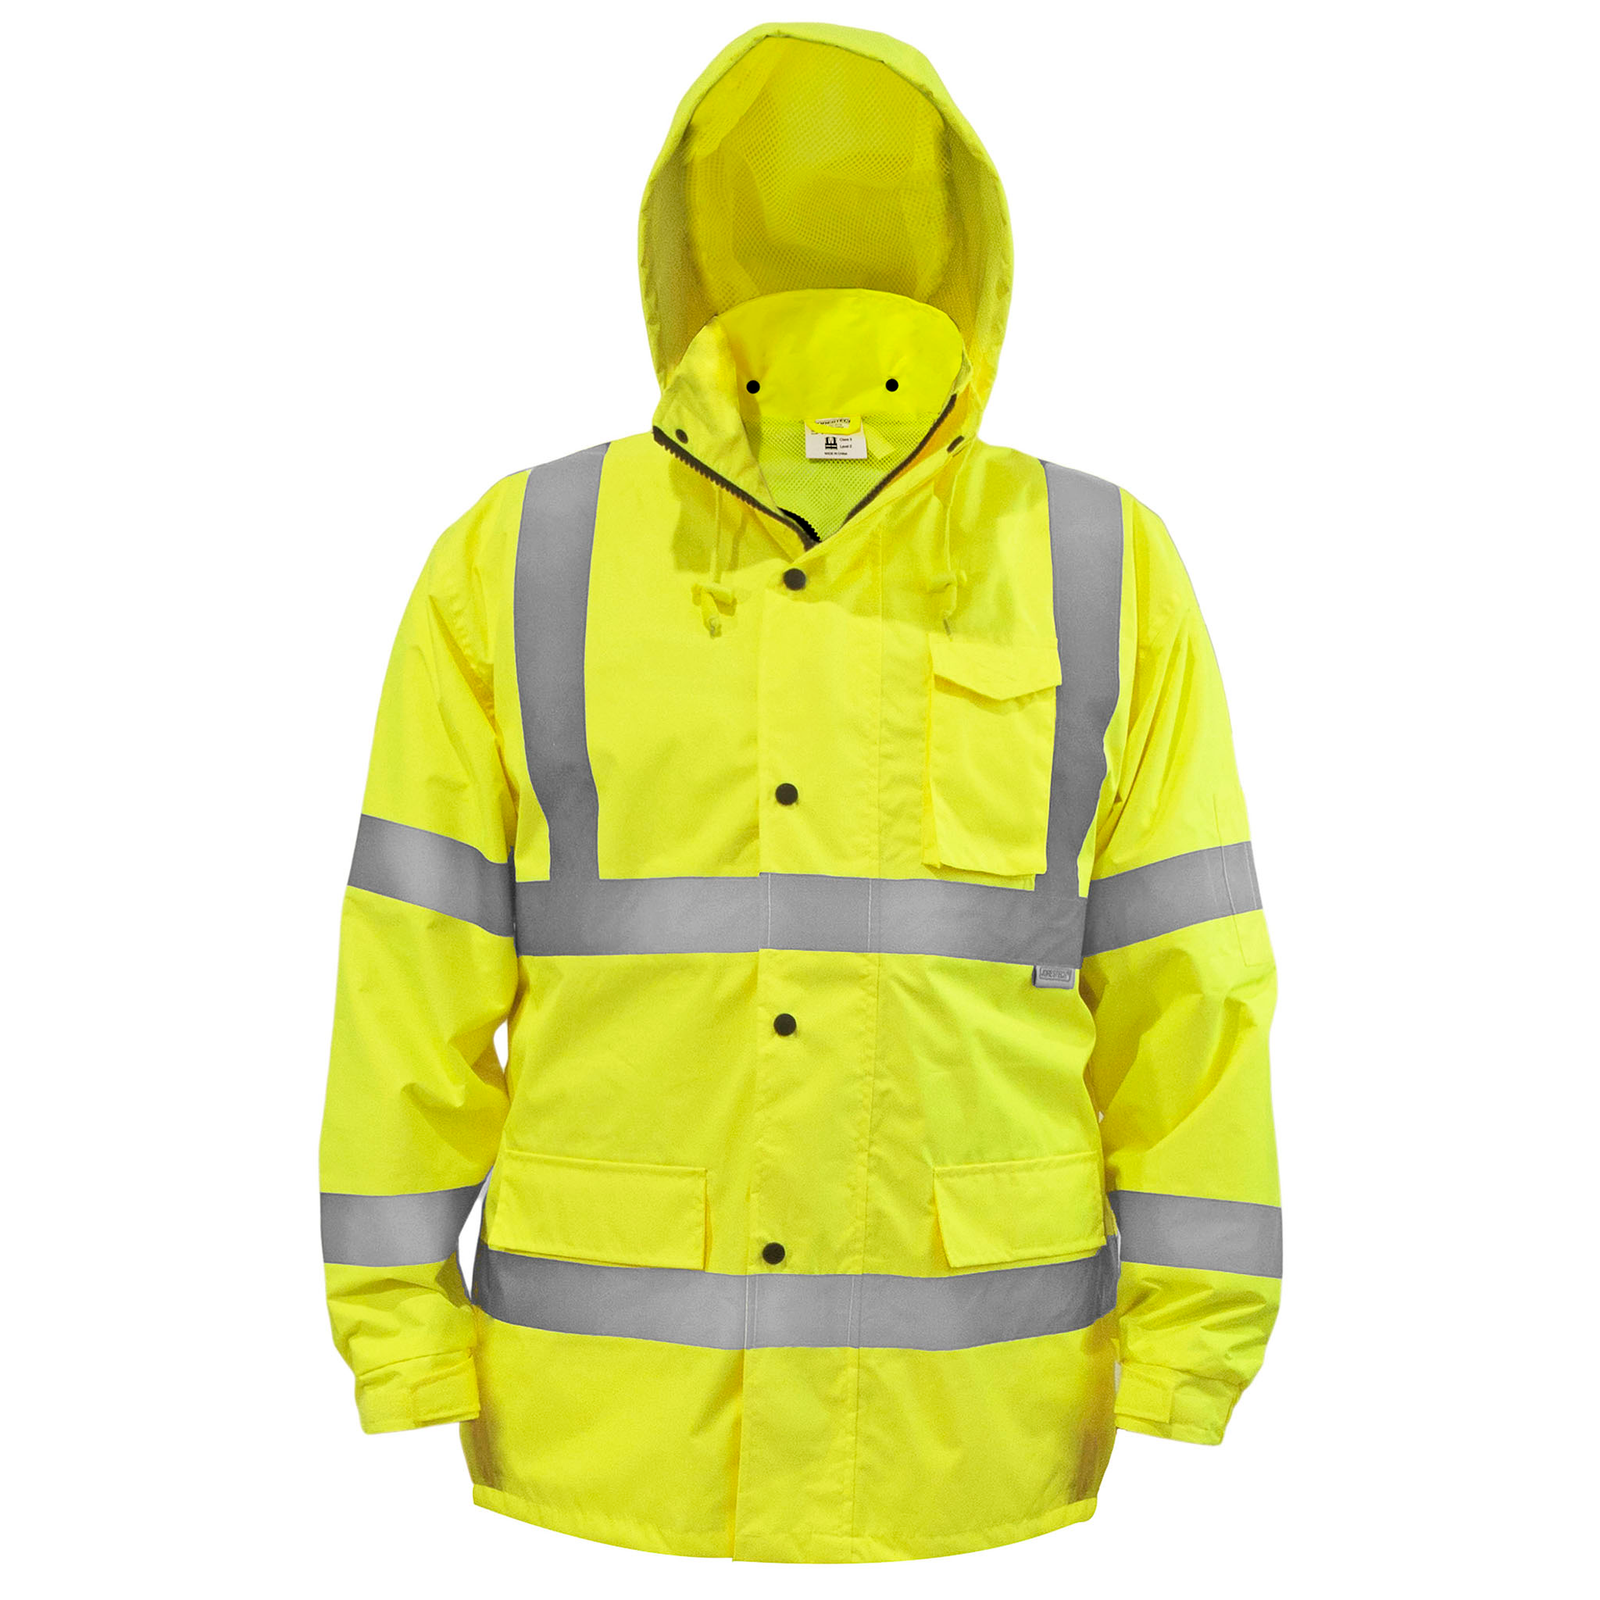 Yellow high visibility rain jacket with hoodie